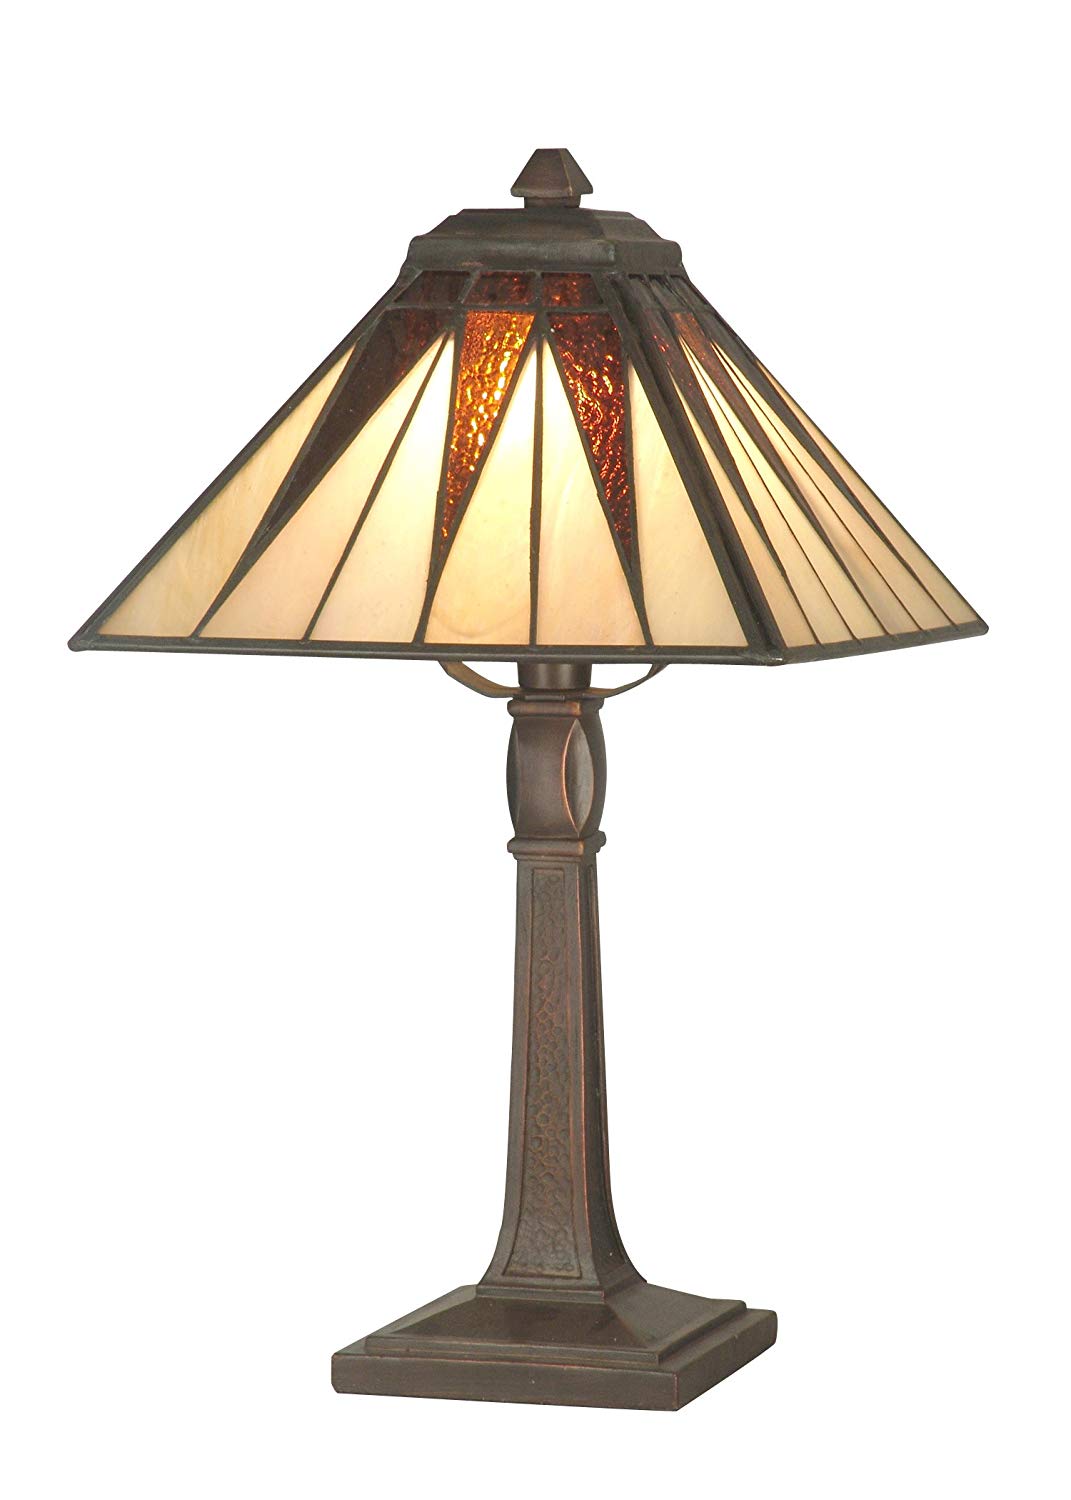 dale tiffany cooper accent lamp antique bronze and art glass table lamps shade metal sofa small round gold homebase outdoor furniture mosaic kitchen ikea tool cabinet audio narrow